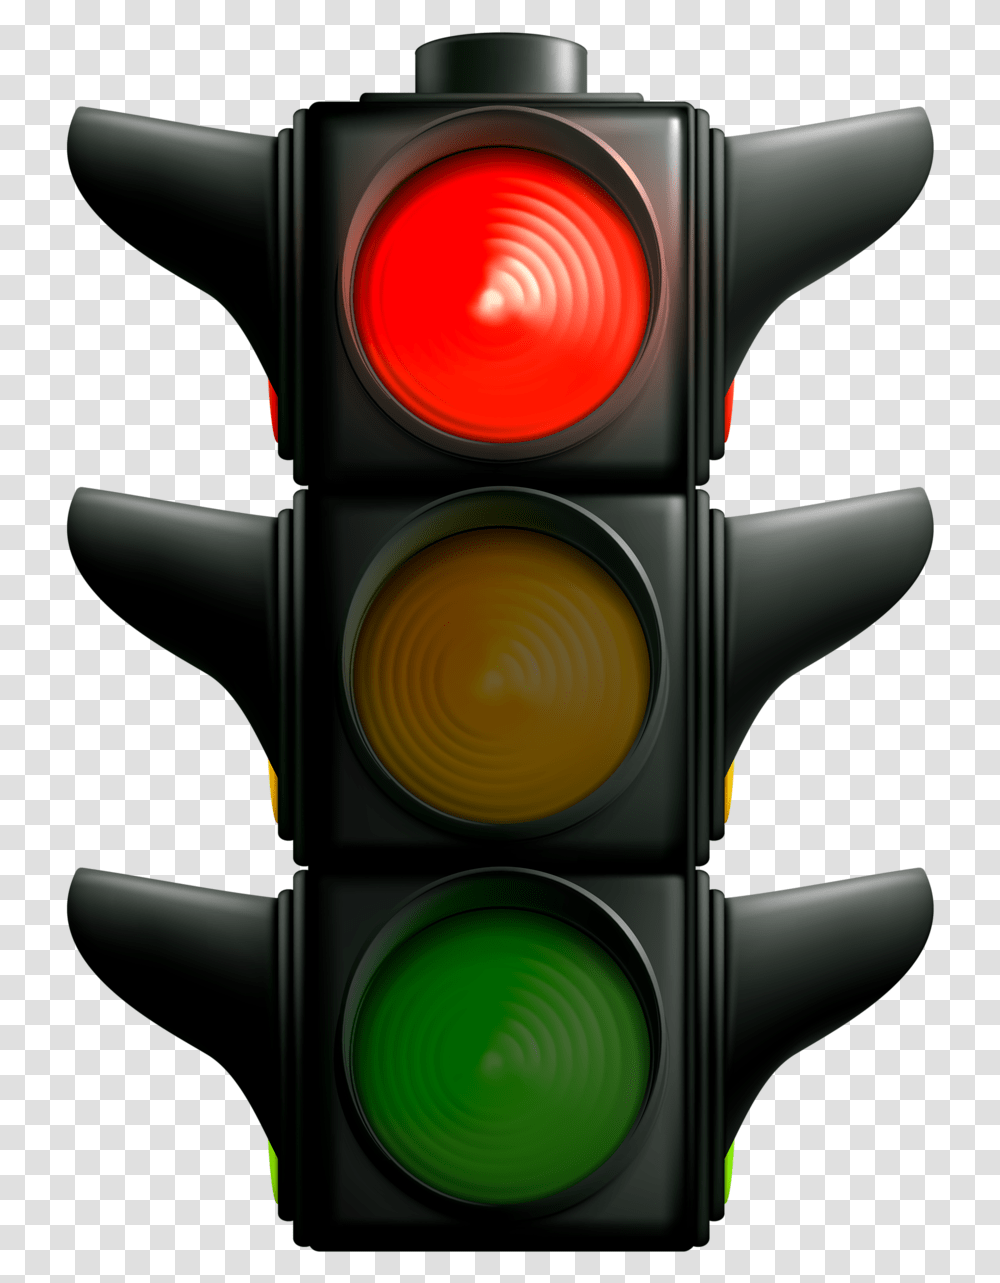 Traffic Light Images Are Free To Download Traffic Light Transparent Png